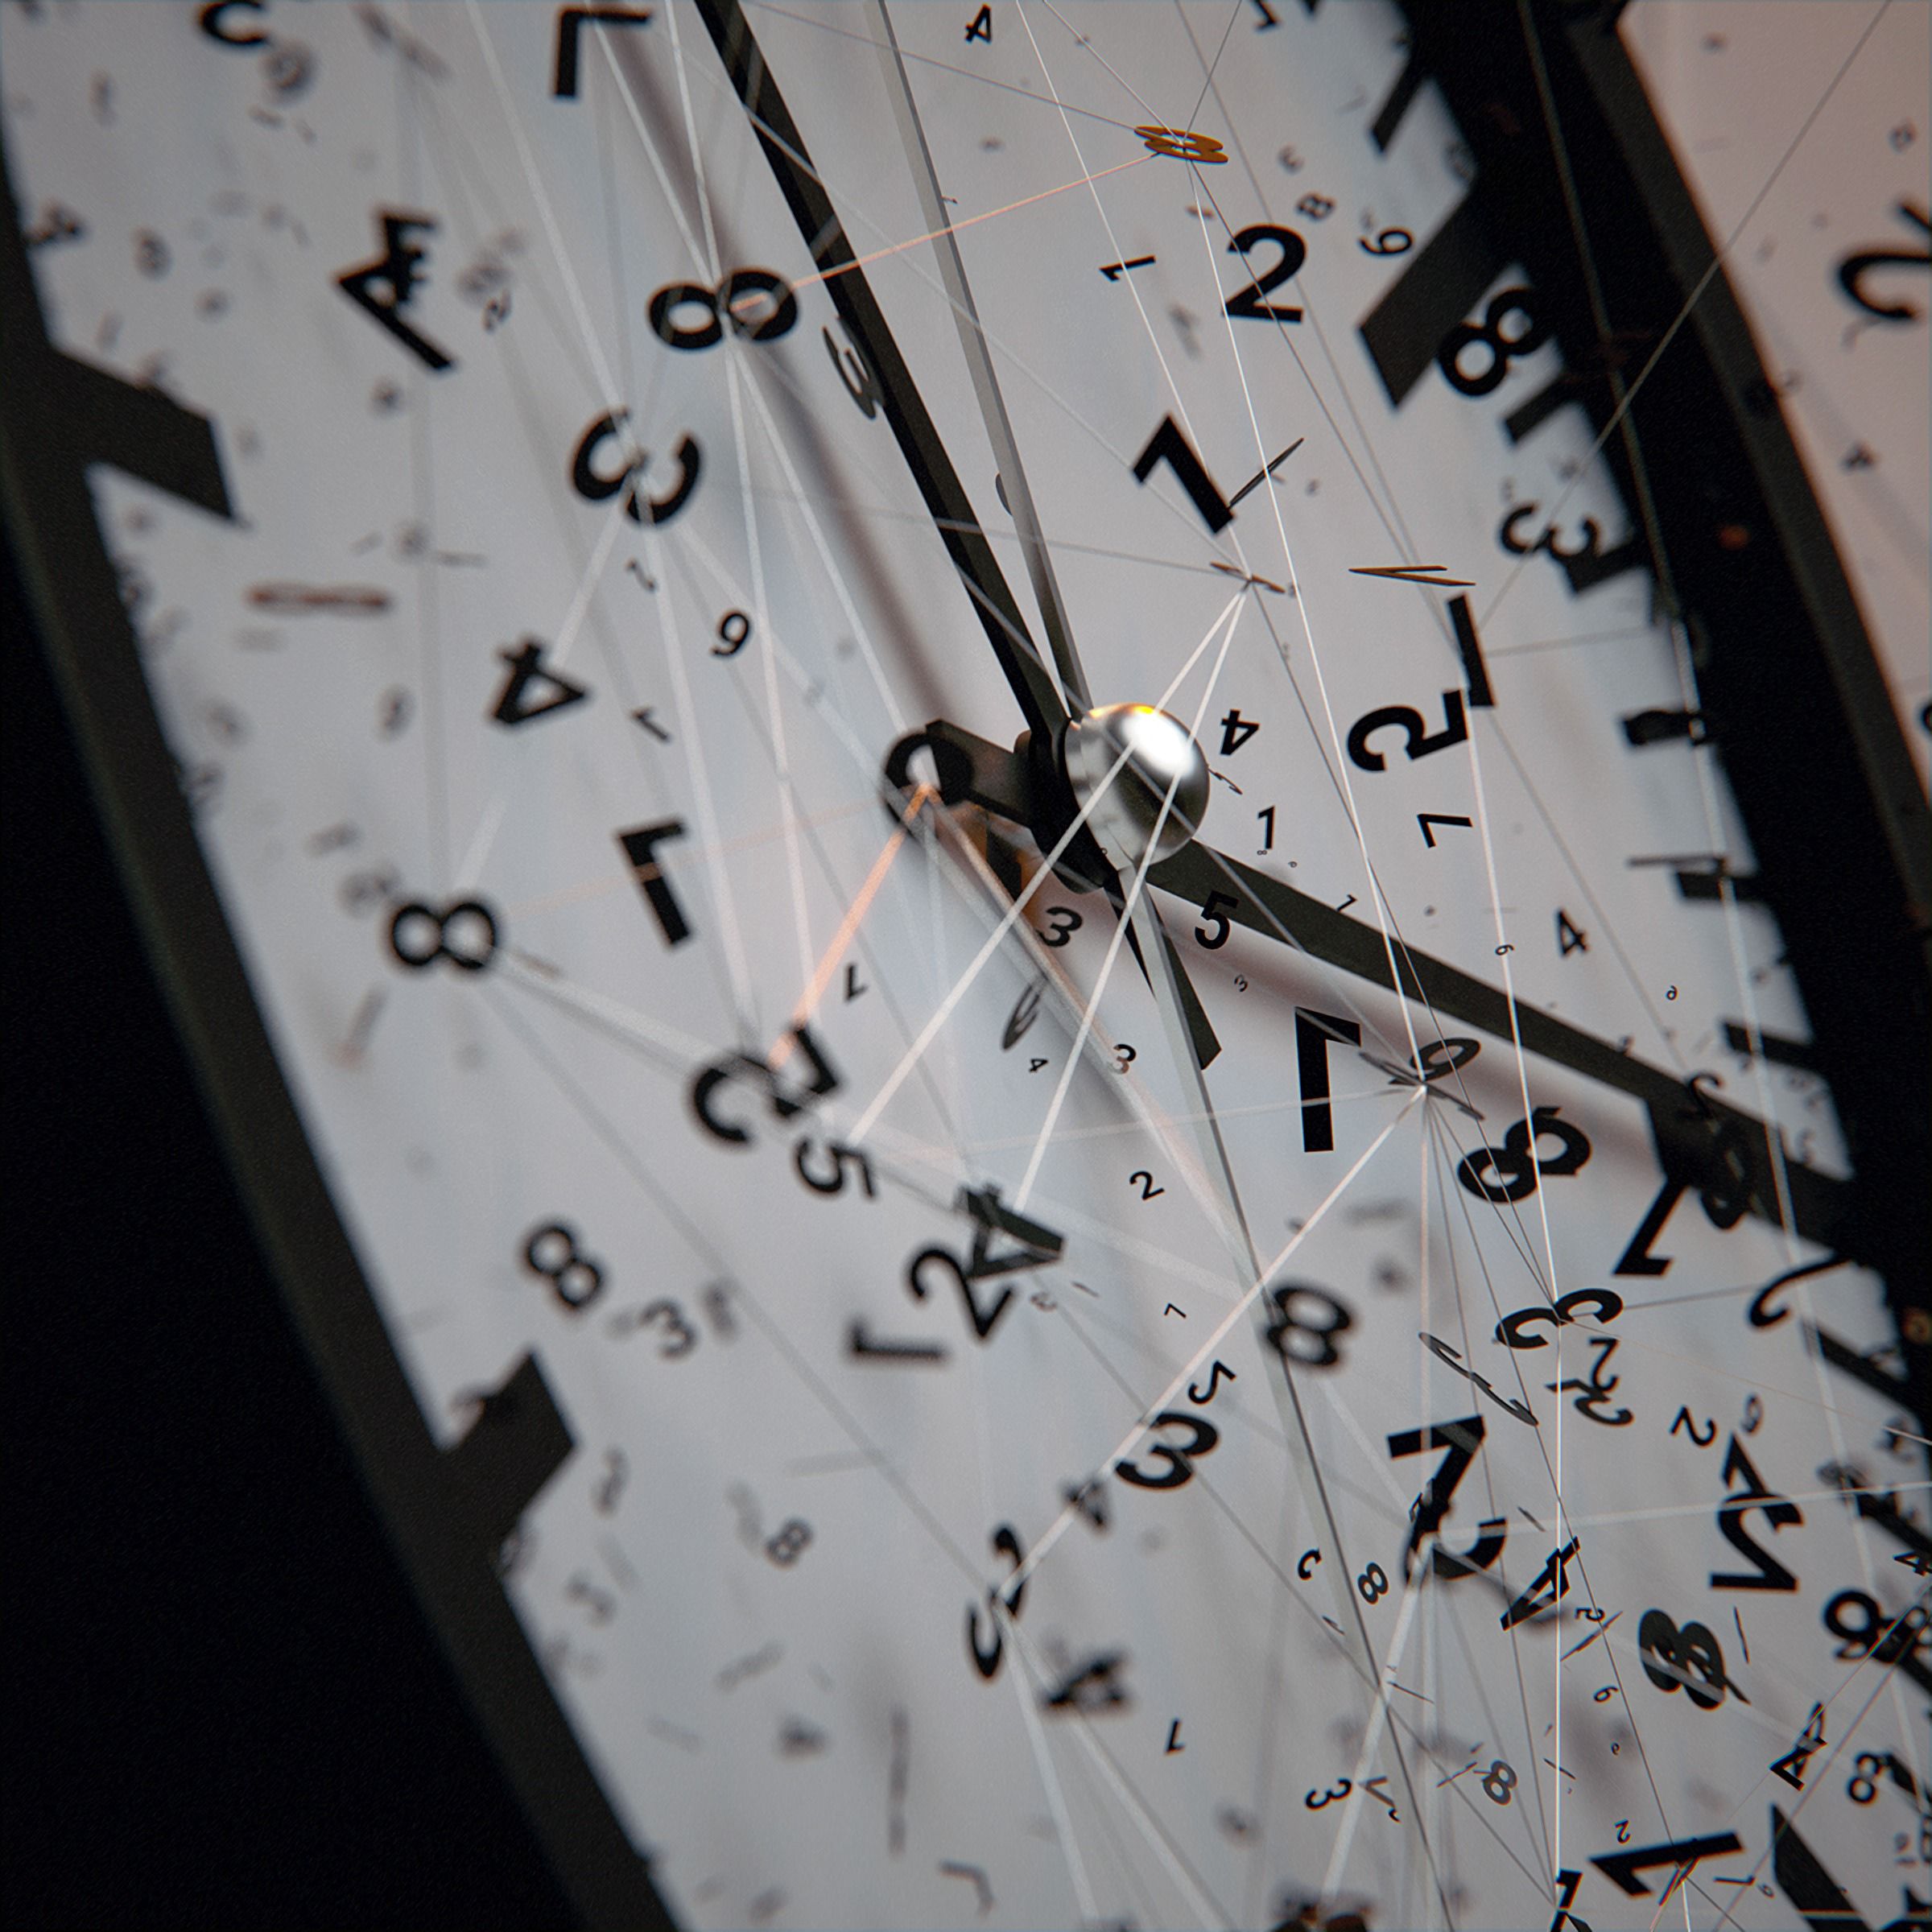 miscellanea, clock, numbers, dial, intricate, miscellaneous, clock face, lines, confused, arrows Full HD